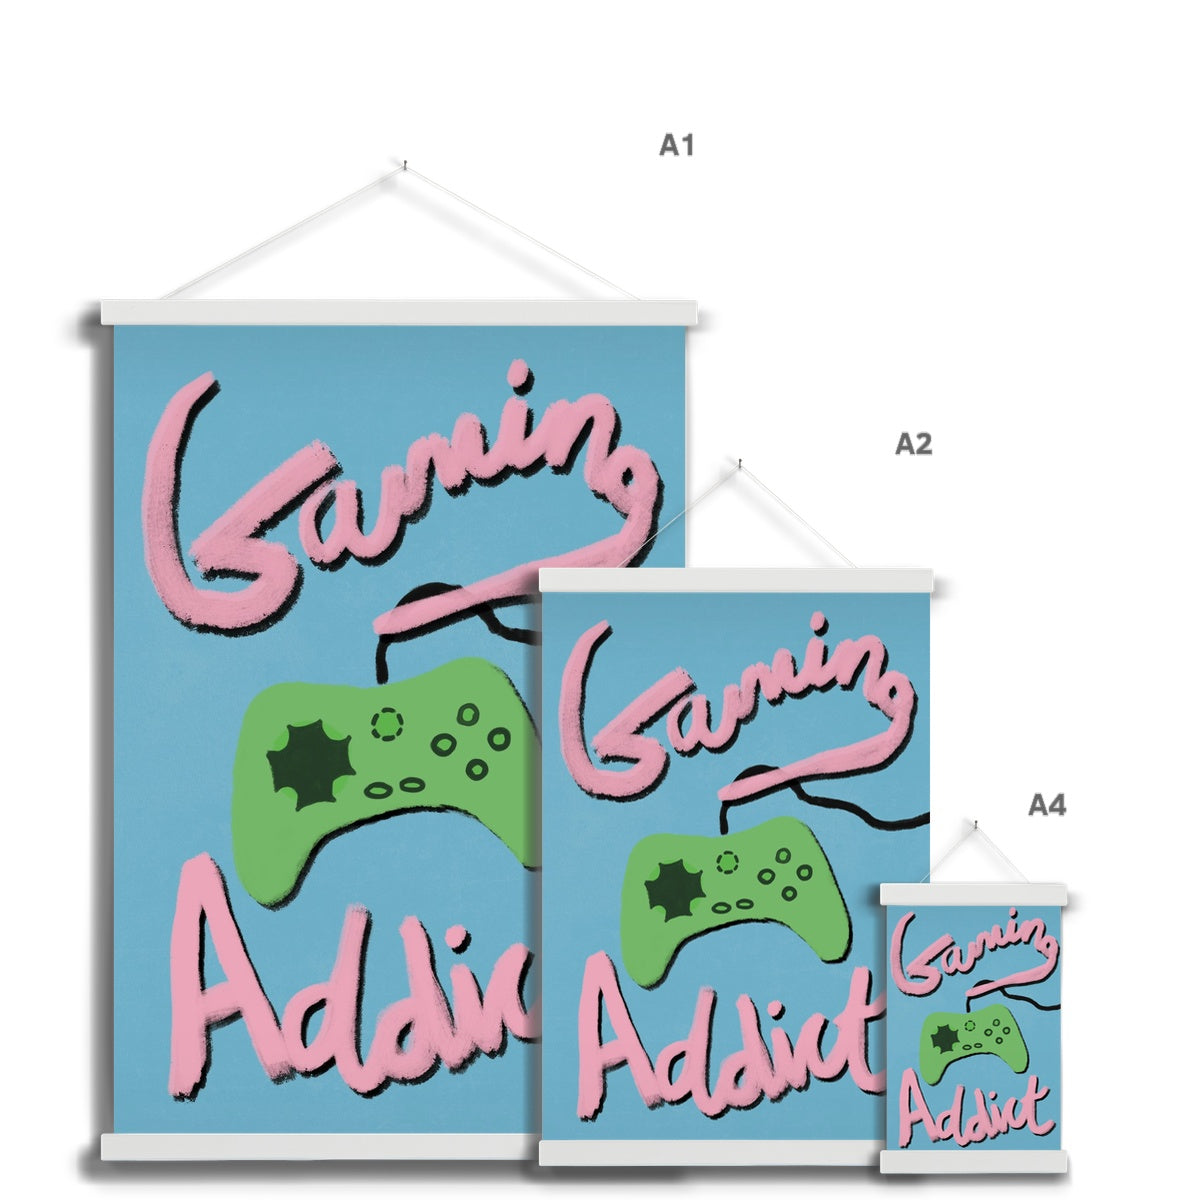 Gaming Addict Print - Blue, Pink, Green Fine Art Print with Hanger